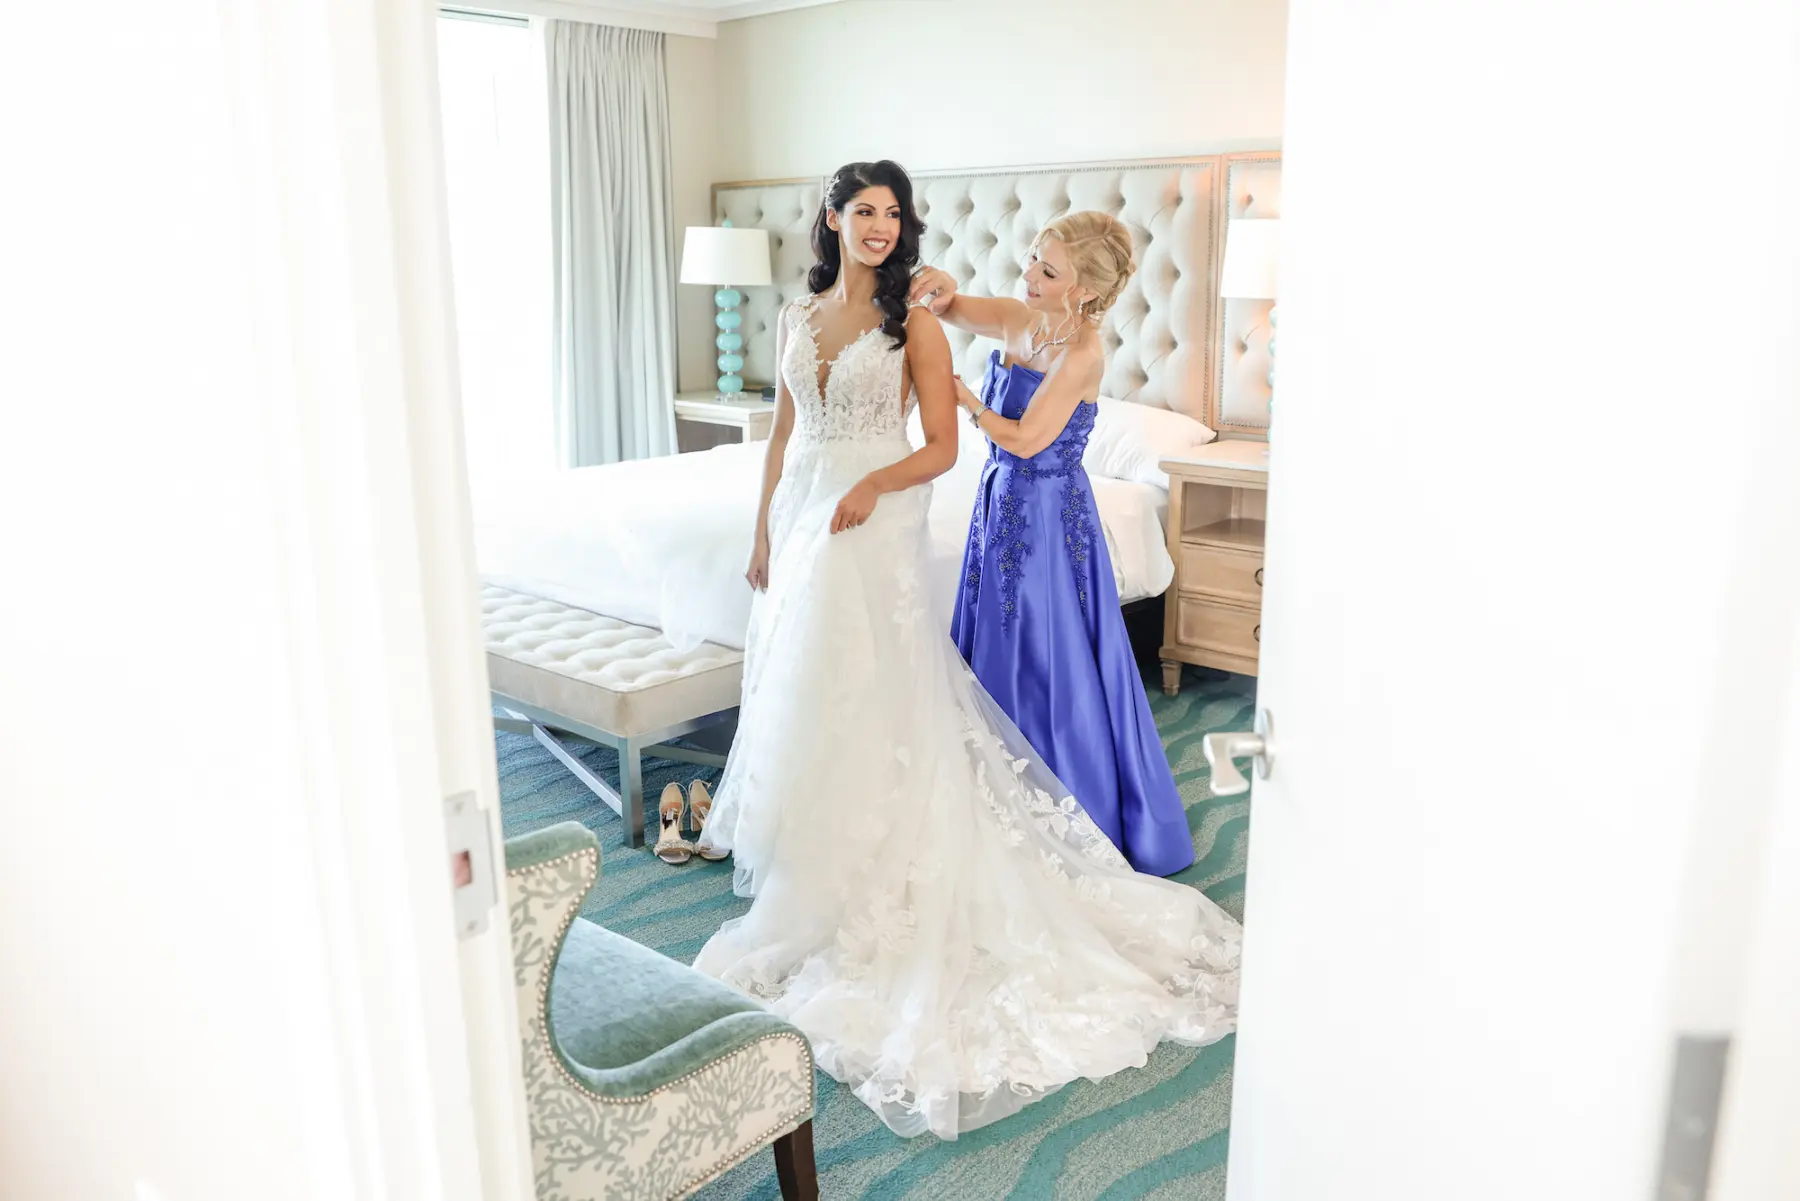 Bride Getting Ready Wedding Portrait | Ivory Lace and Tulle A-Line Lilian West Wedding Dress Ideas | Blue Strapless Mother of the Bride Dress Inspiration